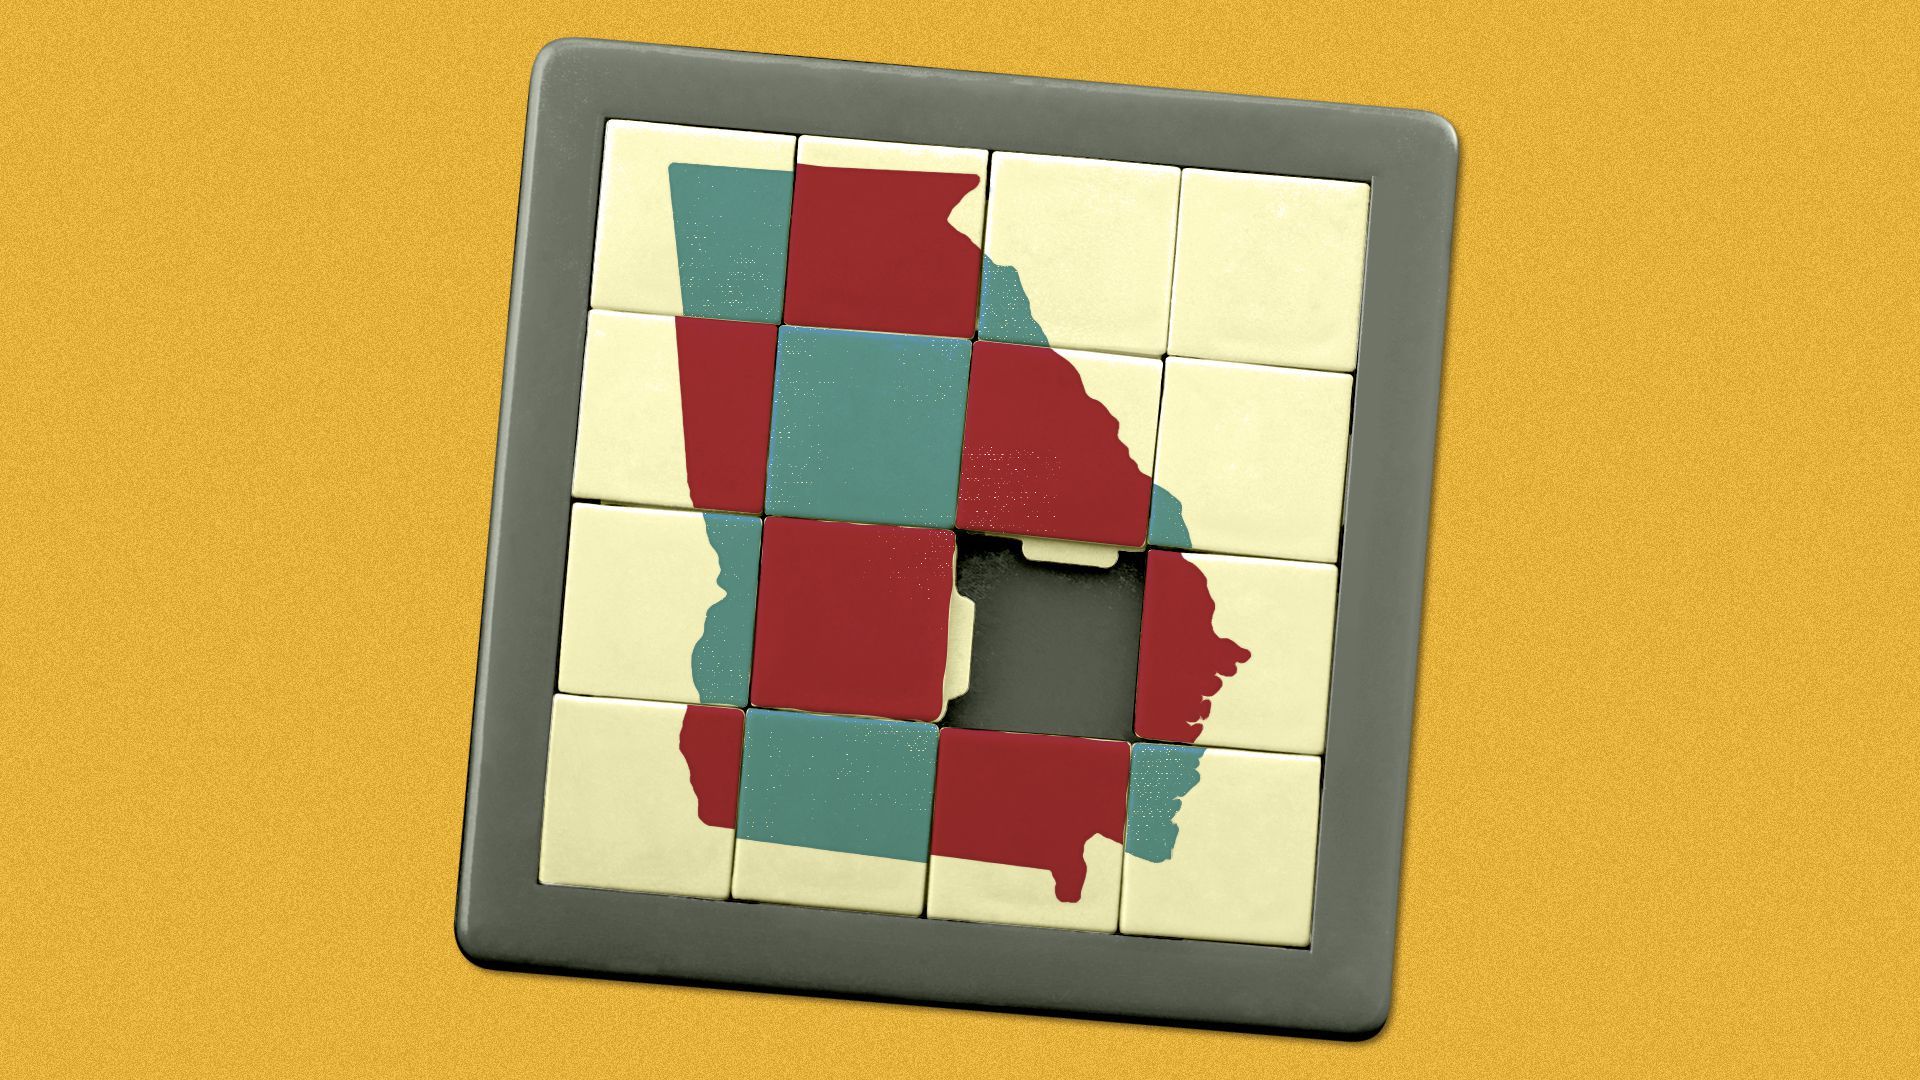 Illustration of a slide puzzle, with the state of Georgia broken up into red and blue tiles.